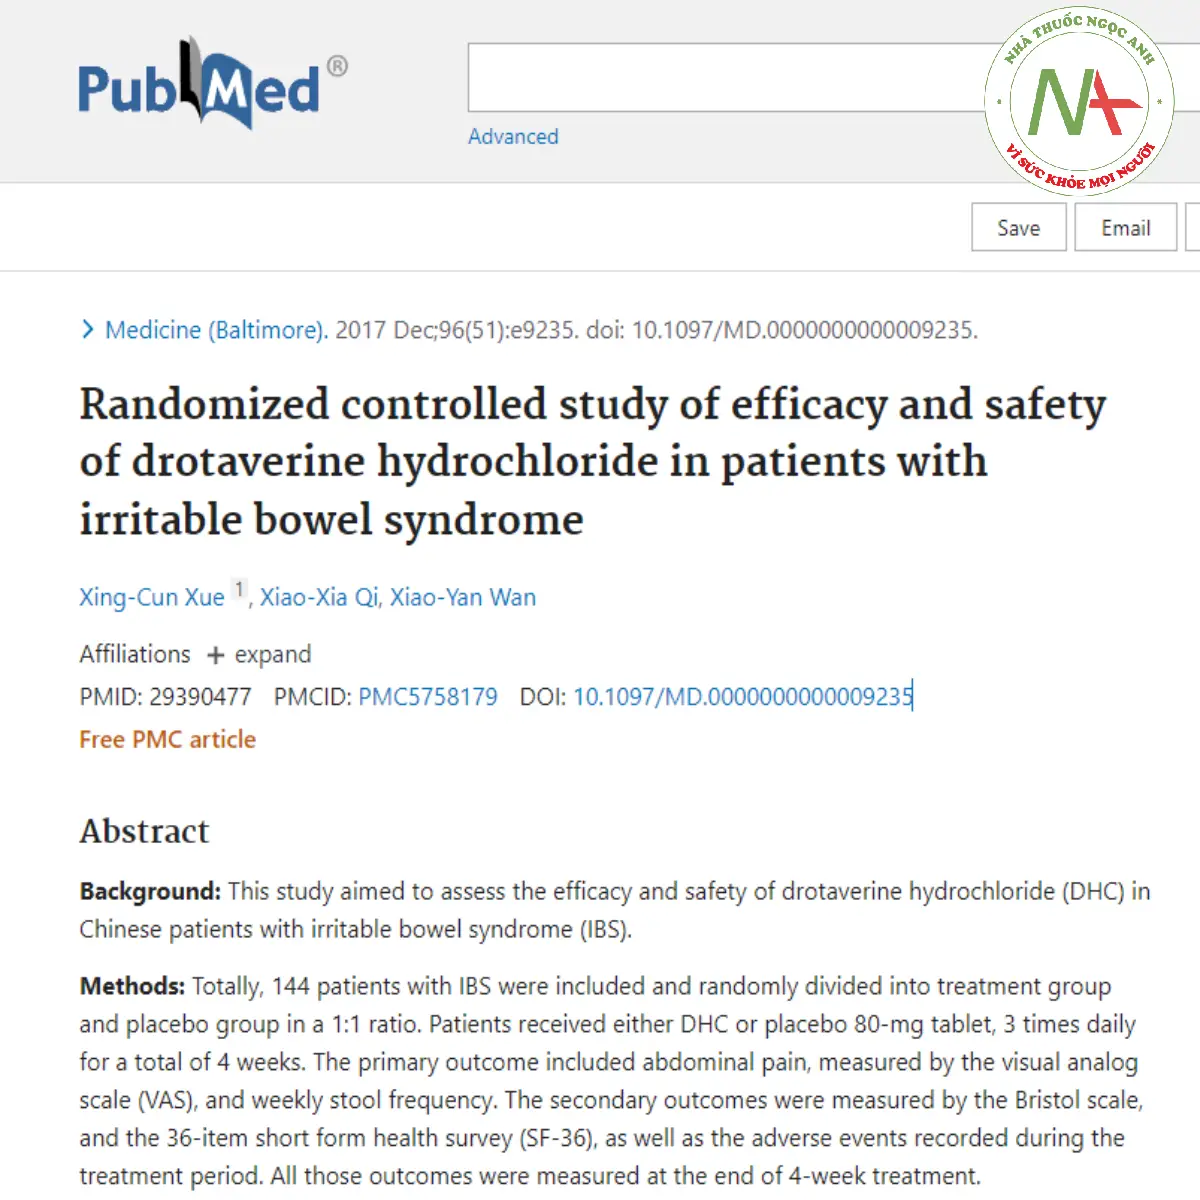 Randomized controlled study of efficacy and safety of drotaverine hydrochloride in patients with irritable bowel syndrome